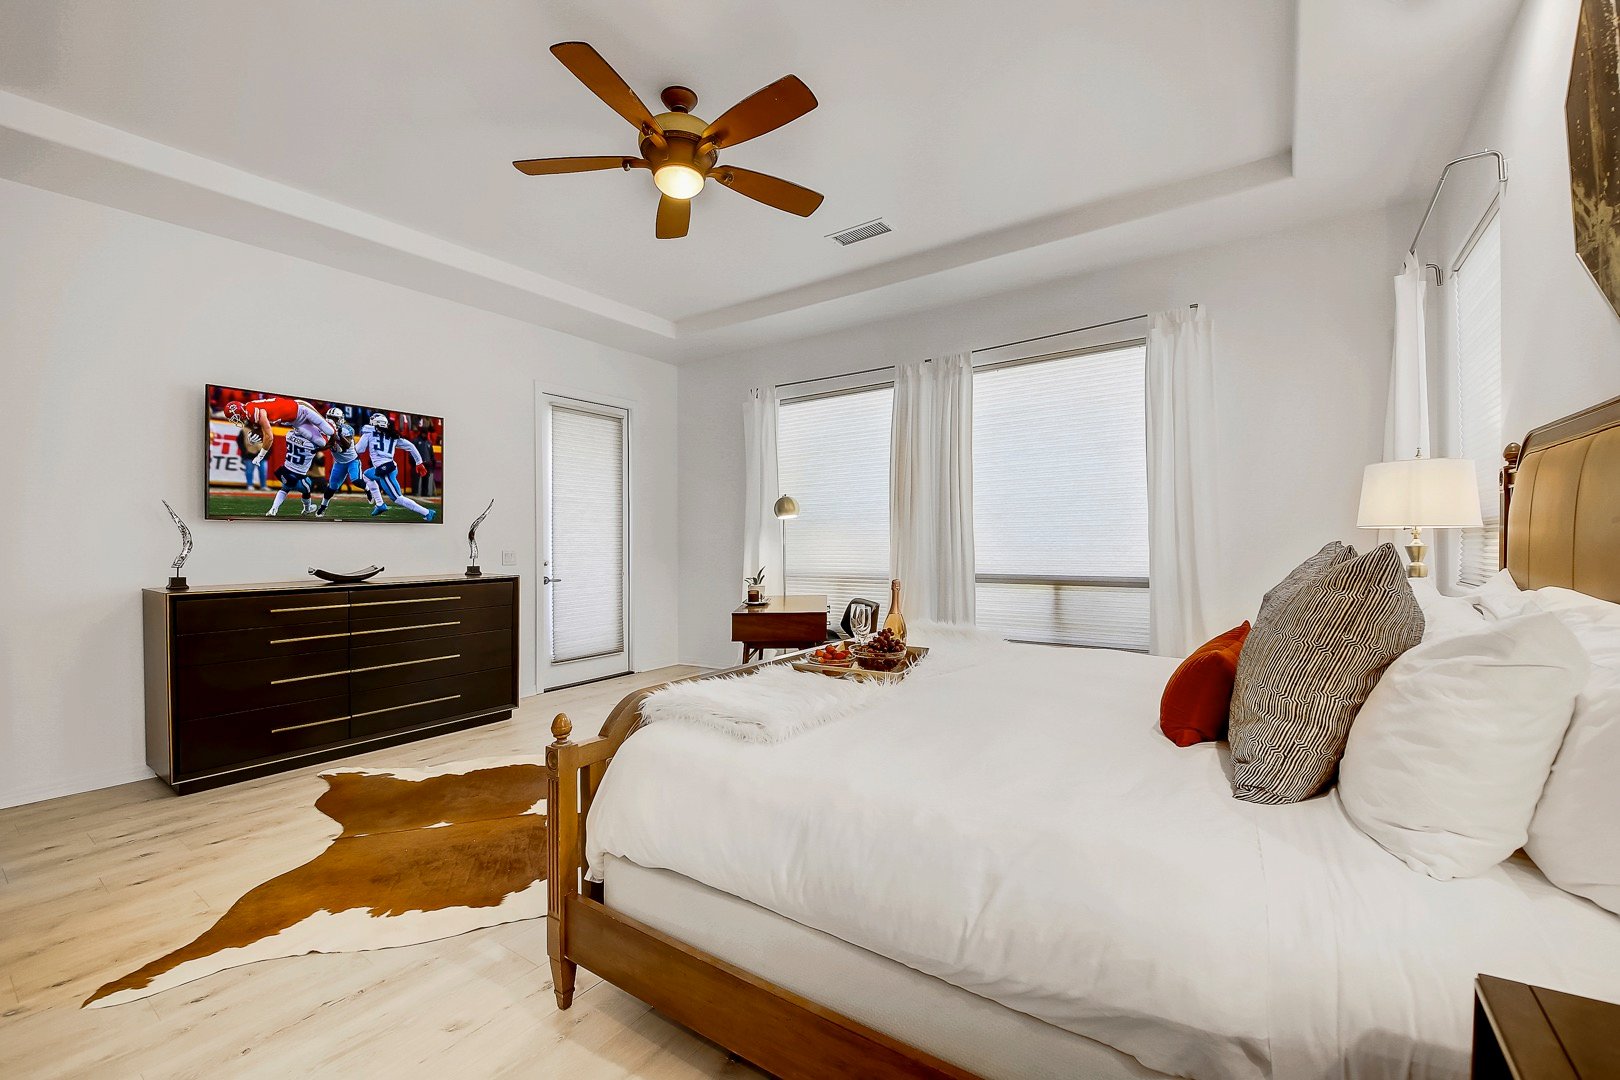 Sleep in and watch the game on the huge TV Master Suite has access to the backyard.